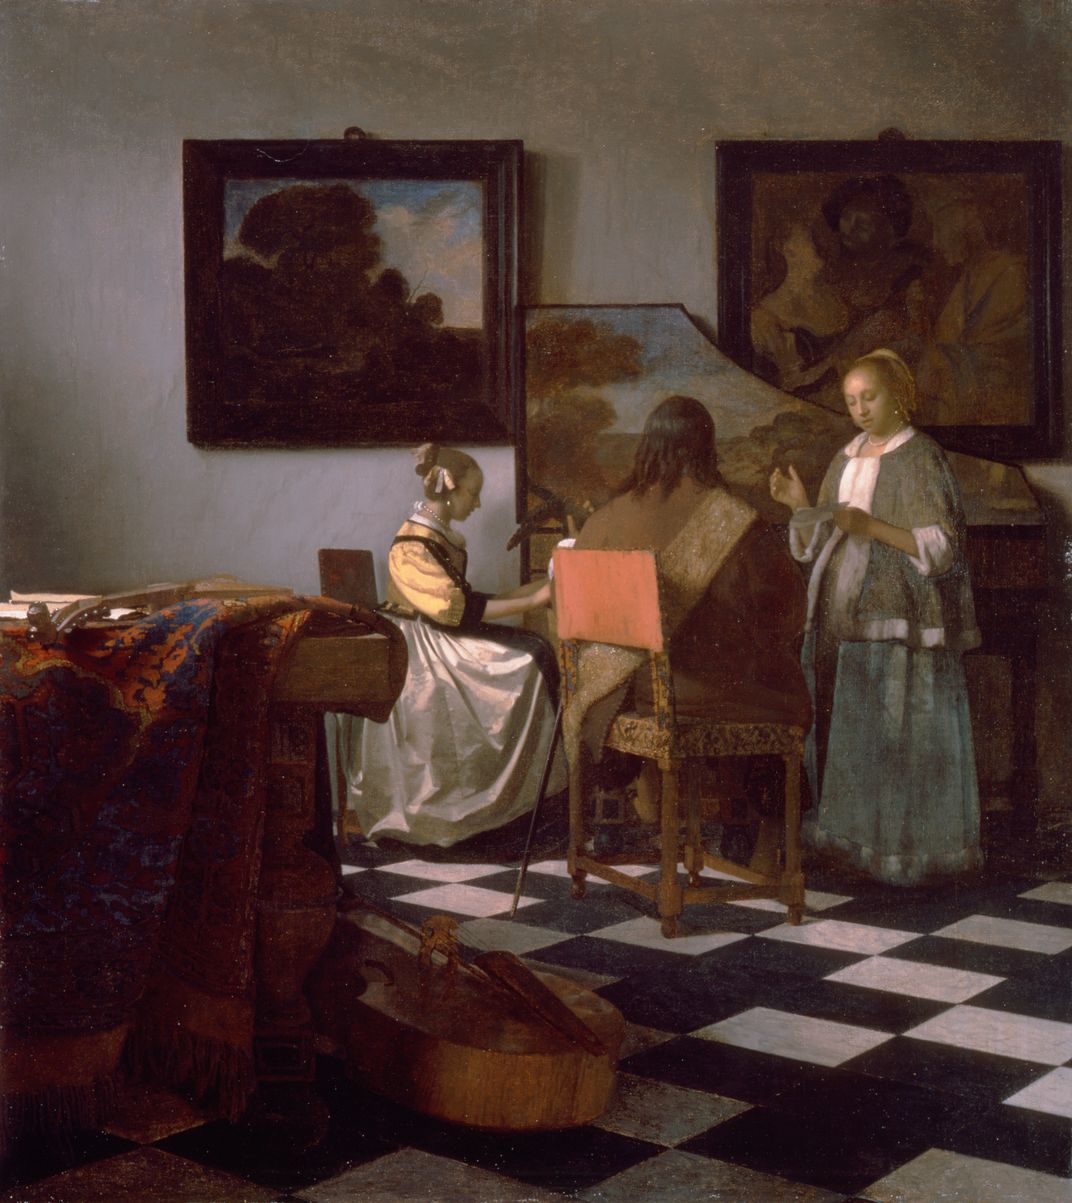 A young girl sits at a piano and practices in a stately room with a black and white checkered floor and canvases on the walls